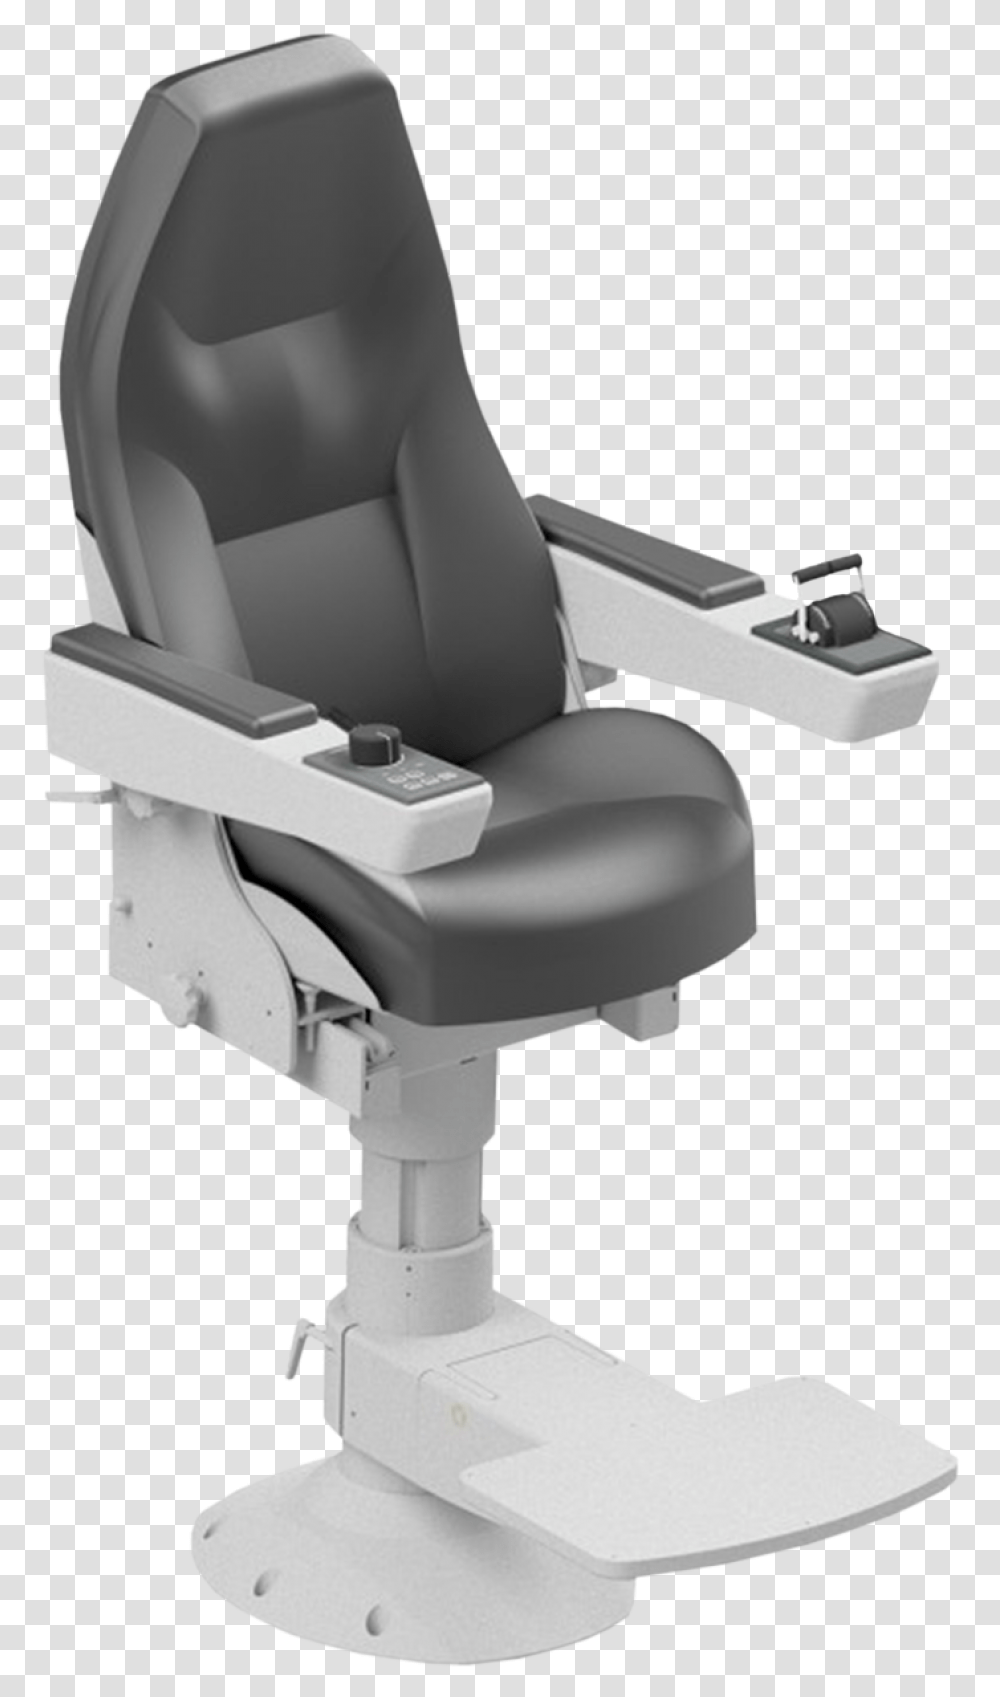 Alphachair Office Chair, Furniture, Sink Faucet, Cushion, Microscope Transparent Png